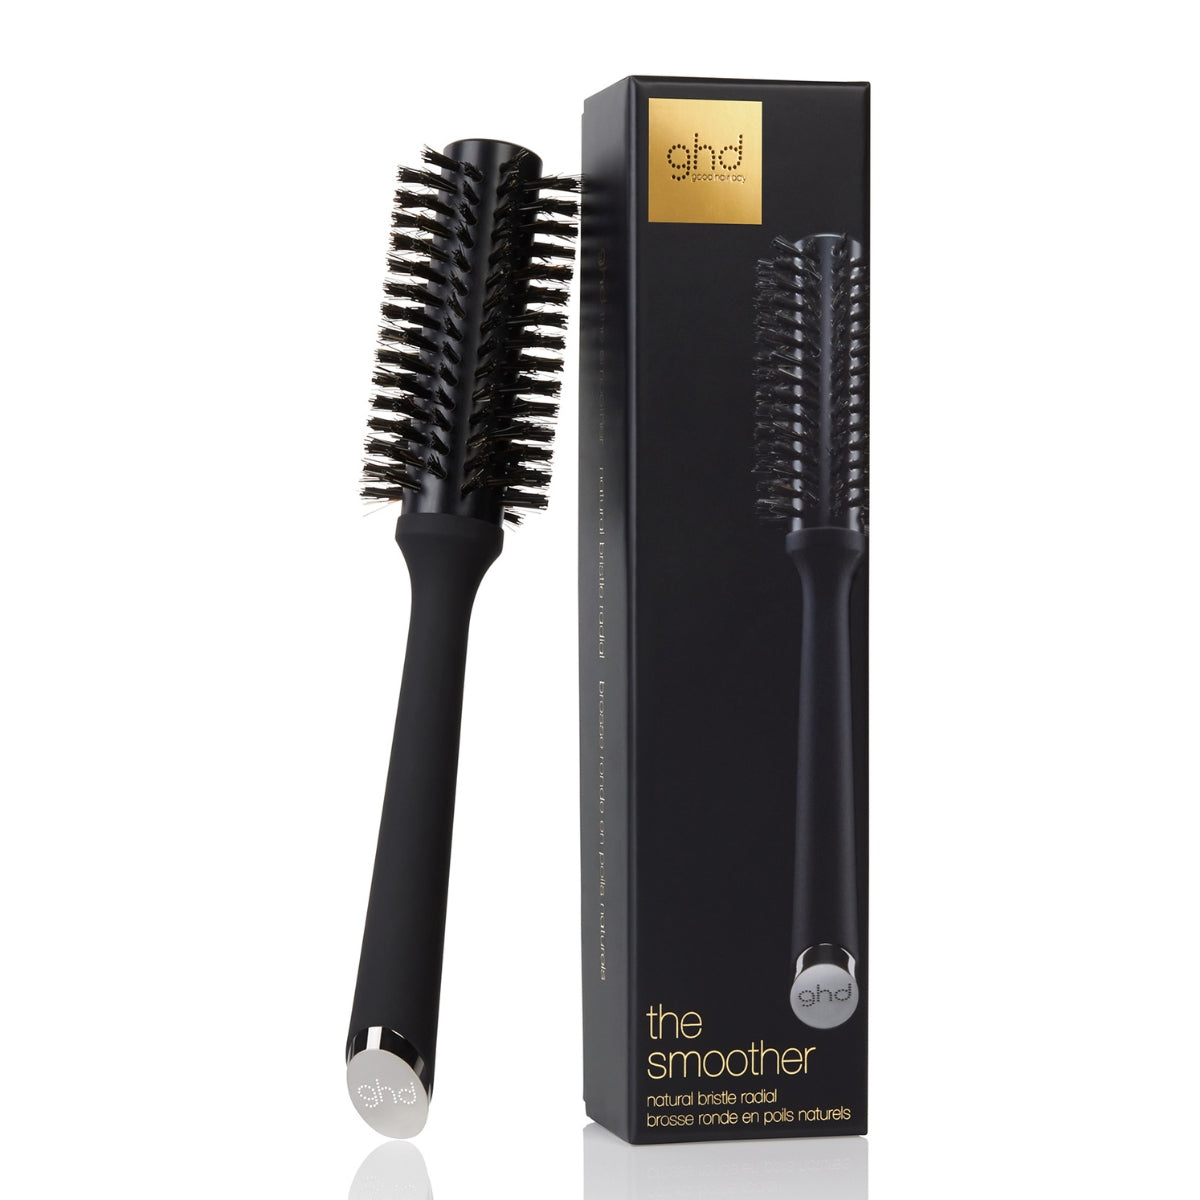 Ghd The Smoother - Natural Bristle Radial Hair Brush (35mm)